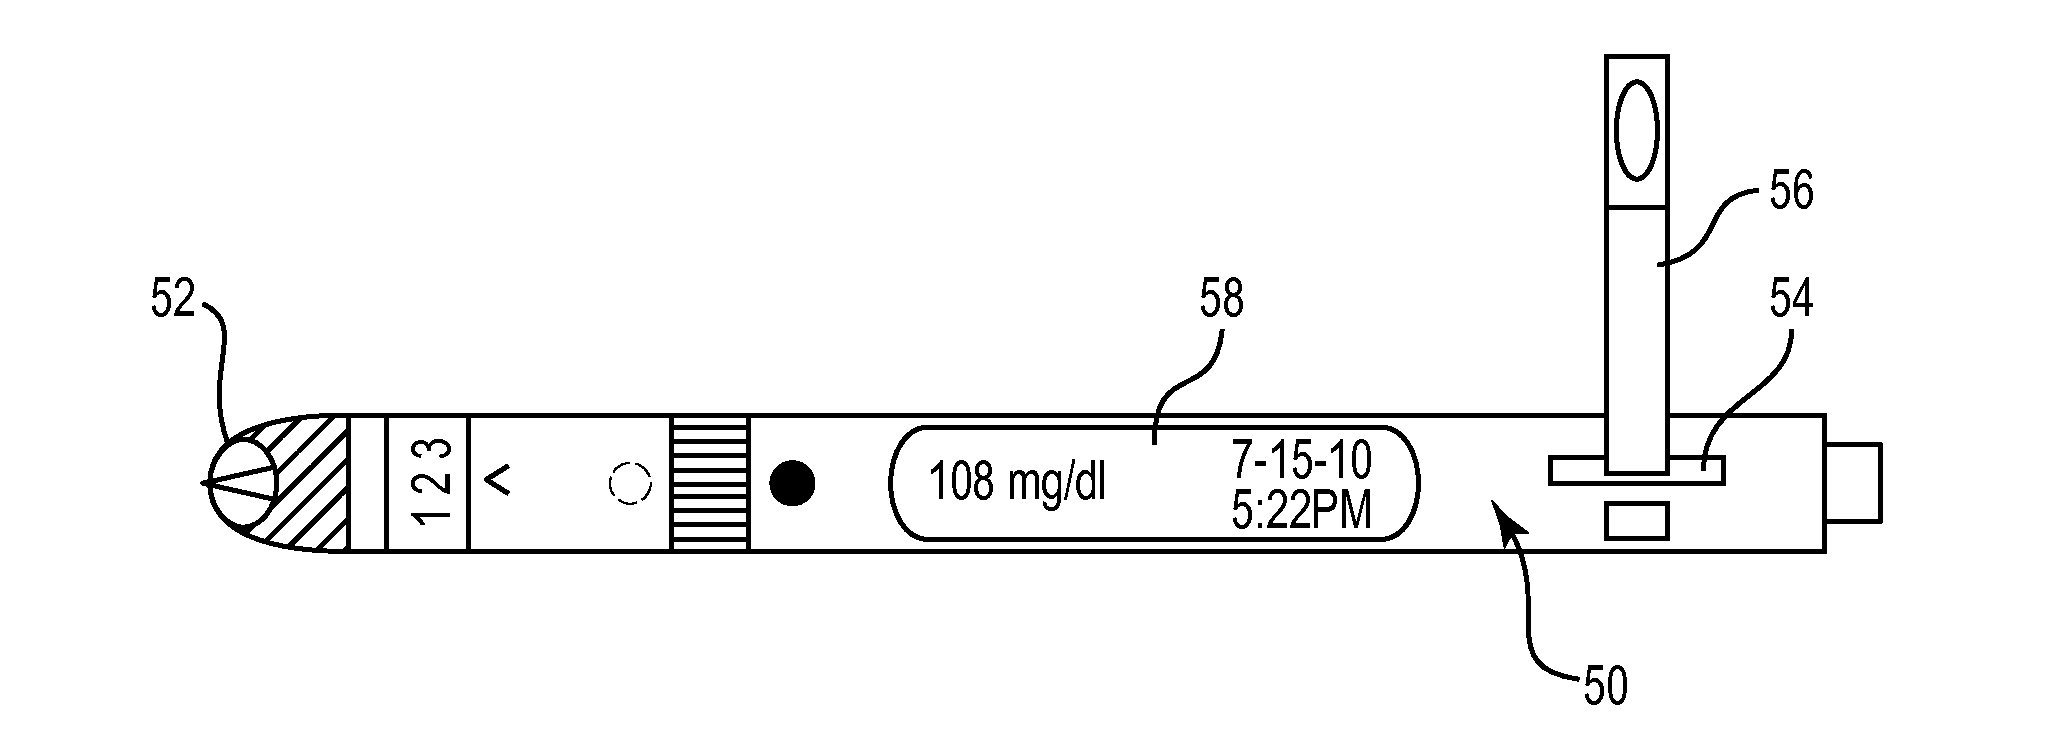 Systems, Methods, and Devices for Reducing the Pain of Glucose Monitoring and Diabetes Treatment